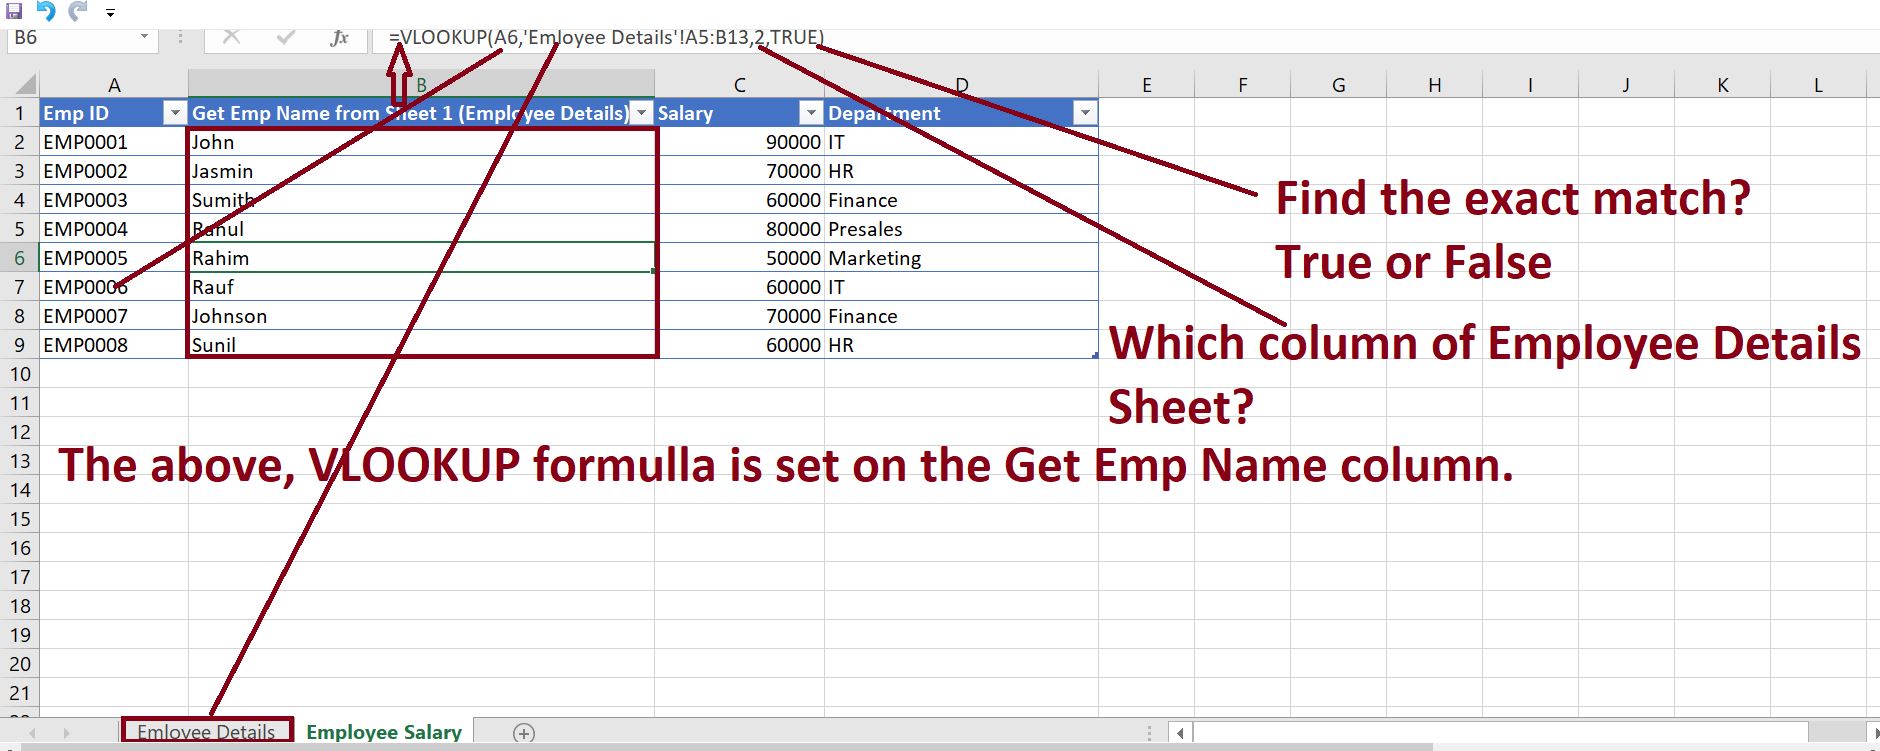 How to use VLOOKUP function in excel?